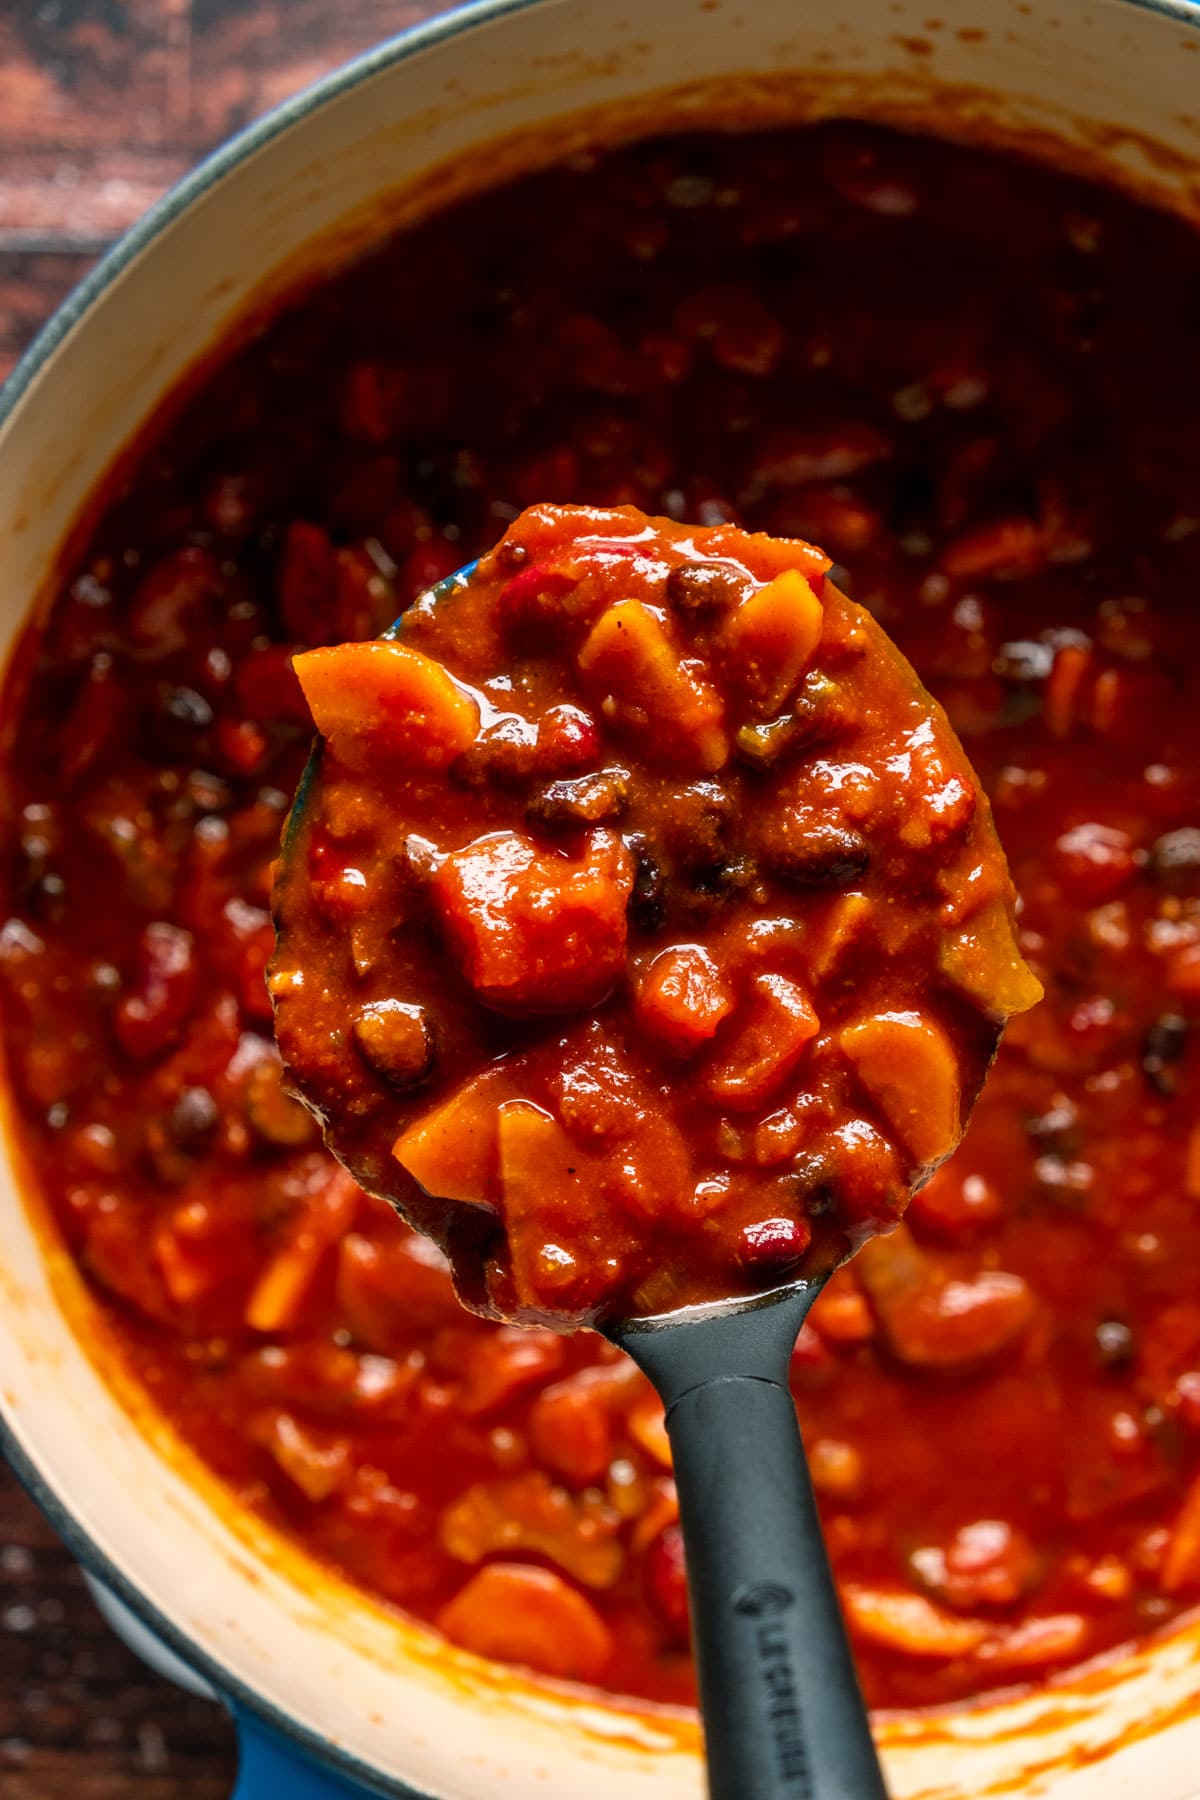 Vegan chili in a pot with a serving spoon.